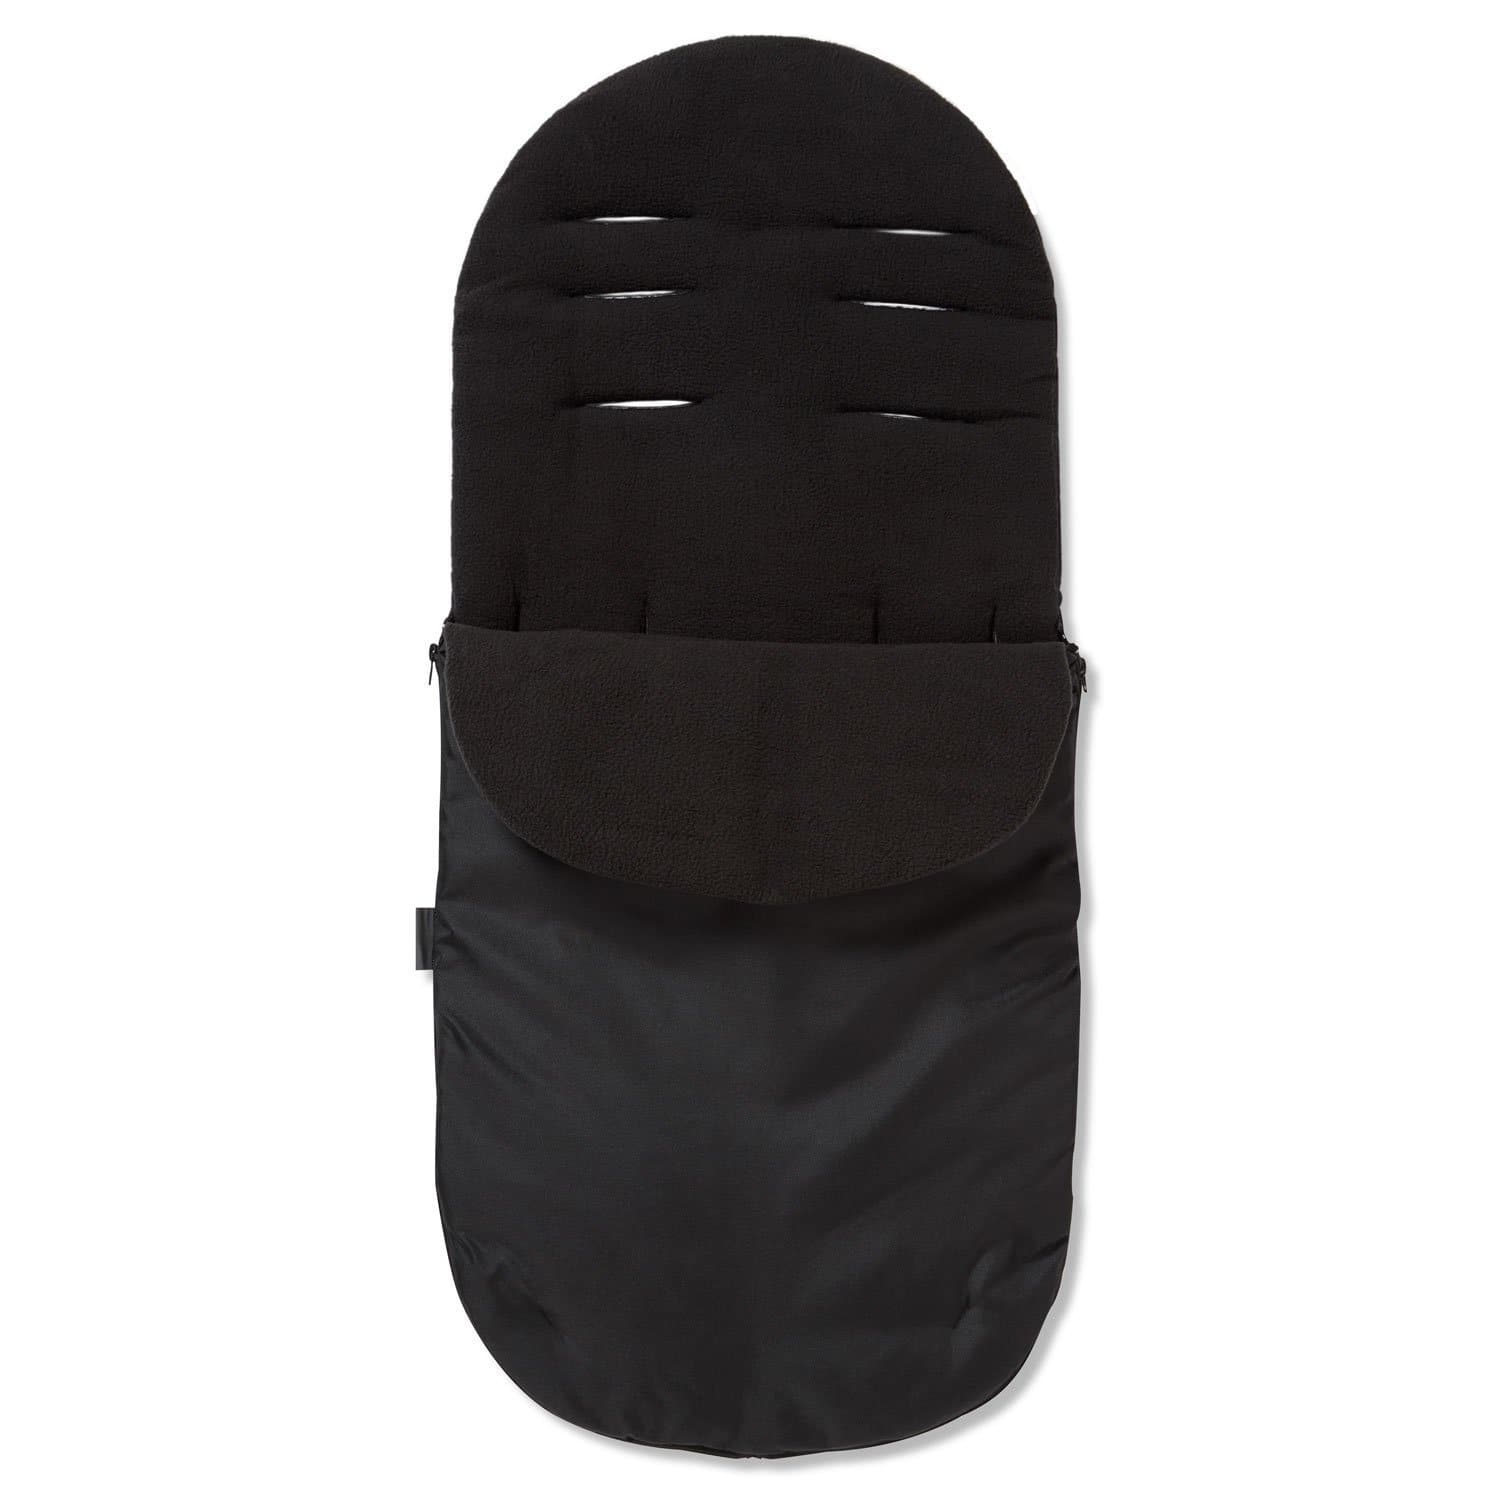 Footmuff / Cosy Toes Compatible with Baby Jogger - Black / Fits All Models | For Your Little One